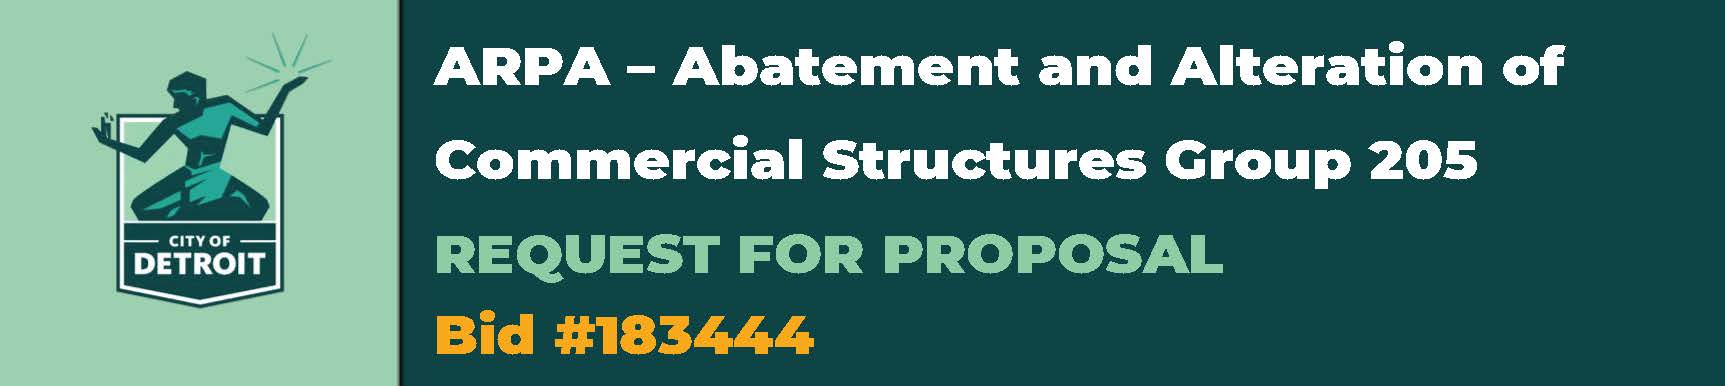 ARPA – Abatement and Alteration of Commercial Structures Group 205